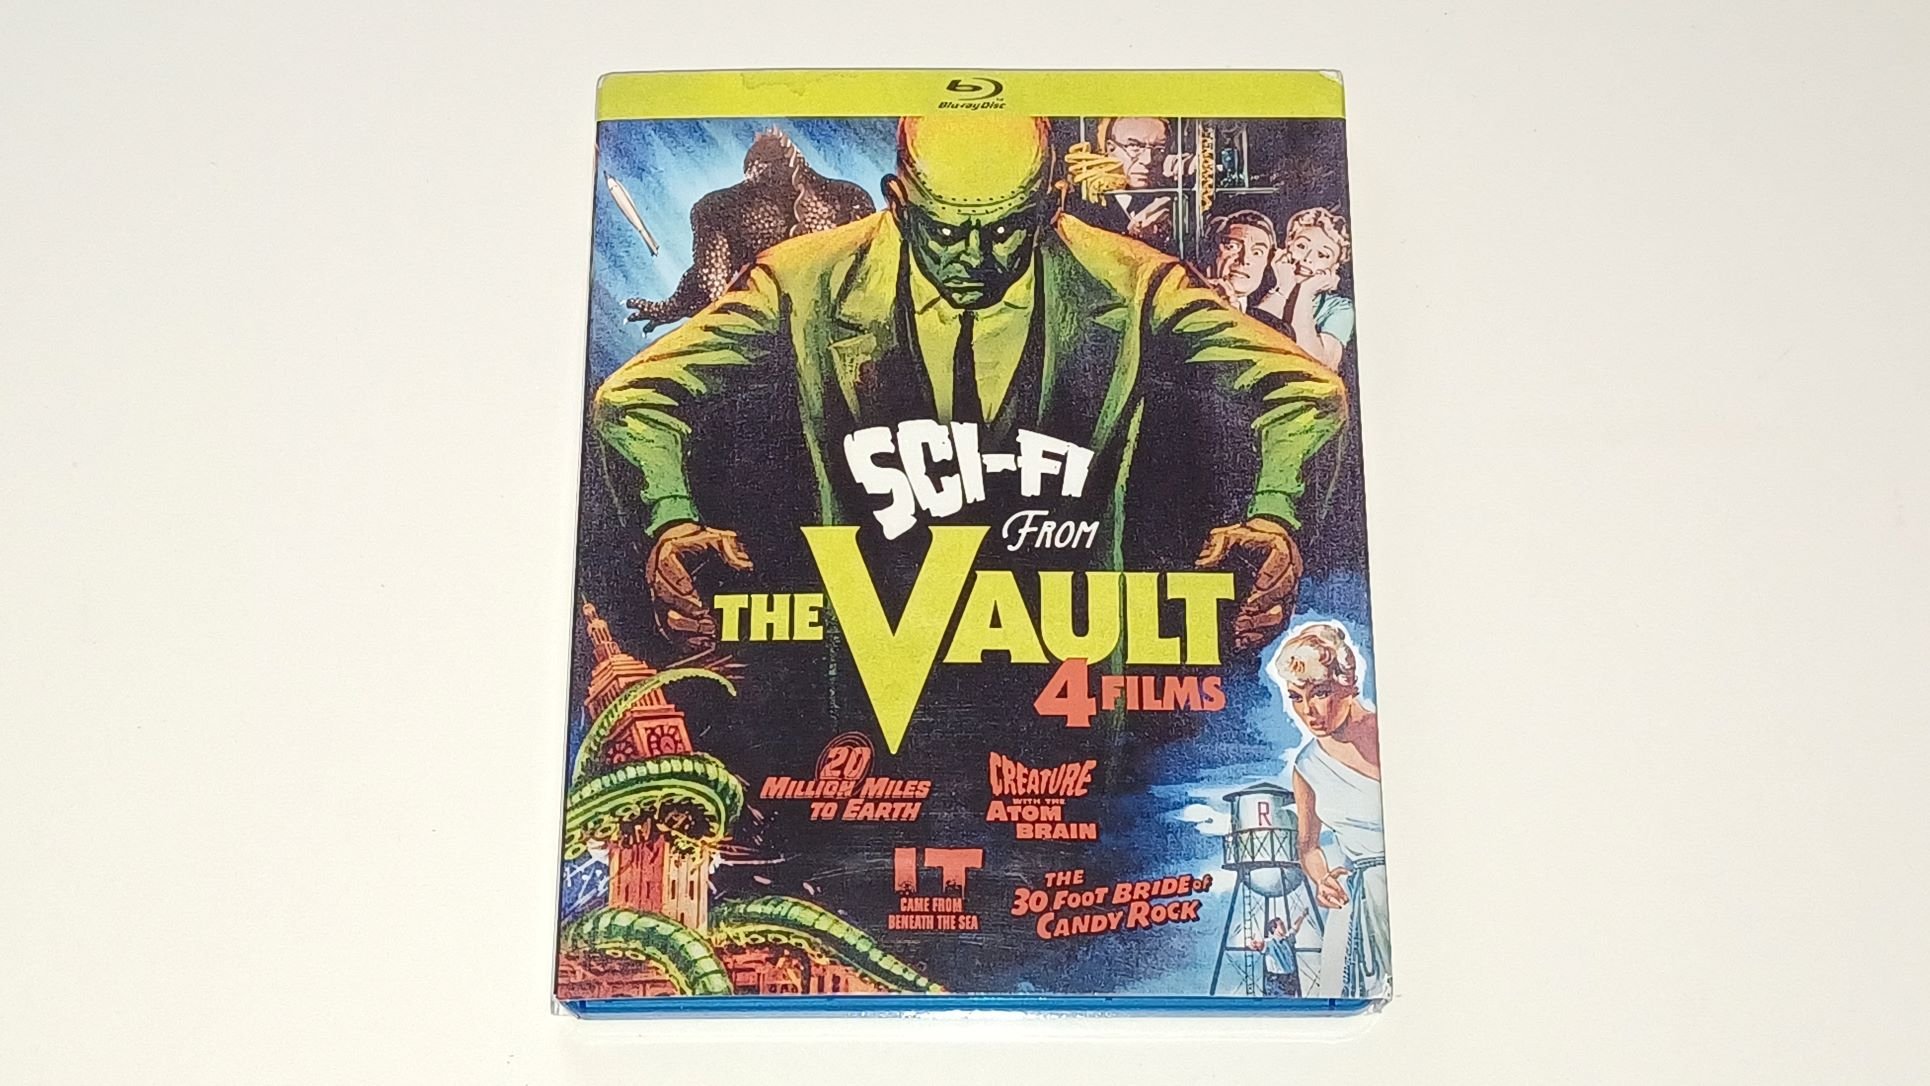 Sci-Fi From the Vaul Blu-ray